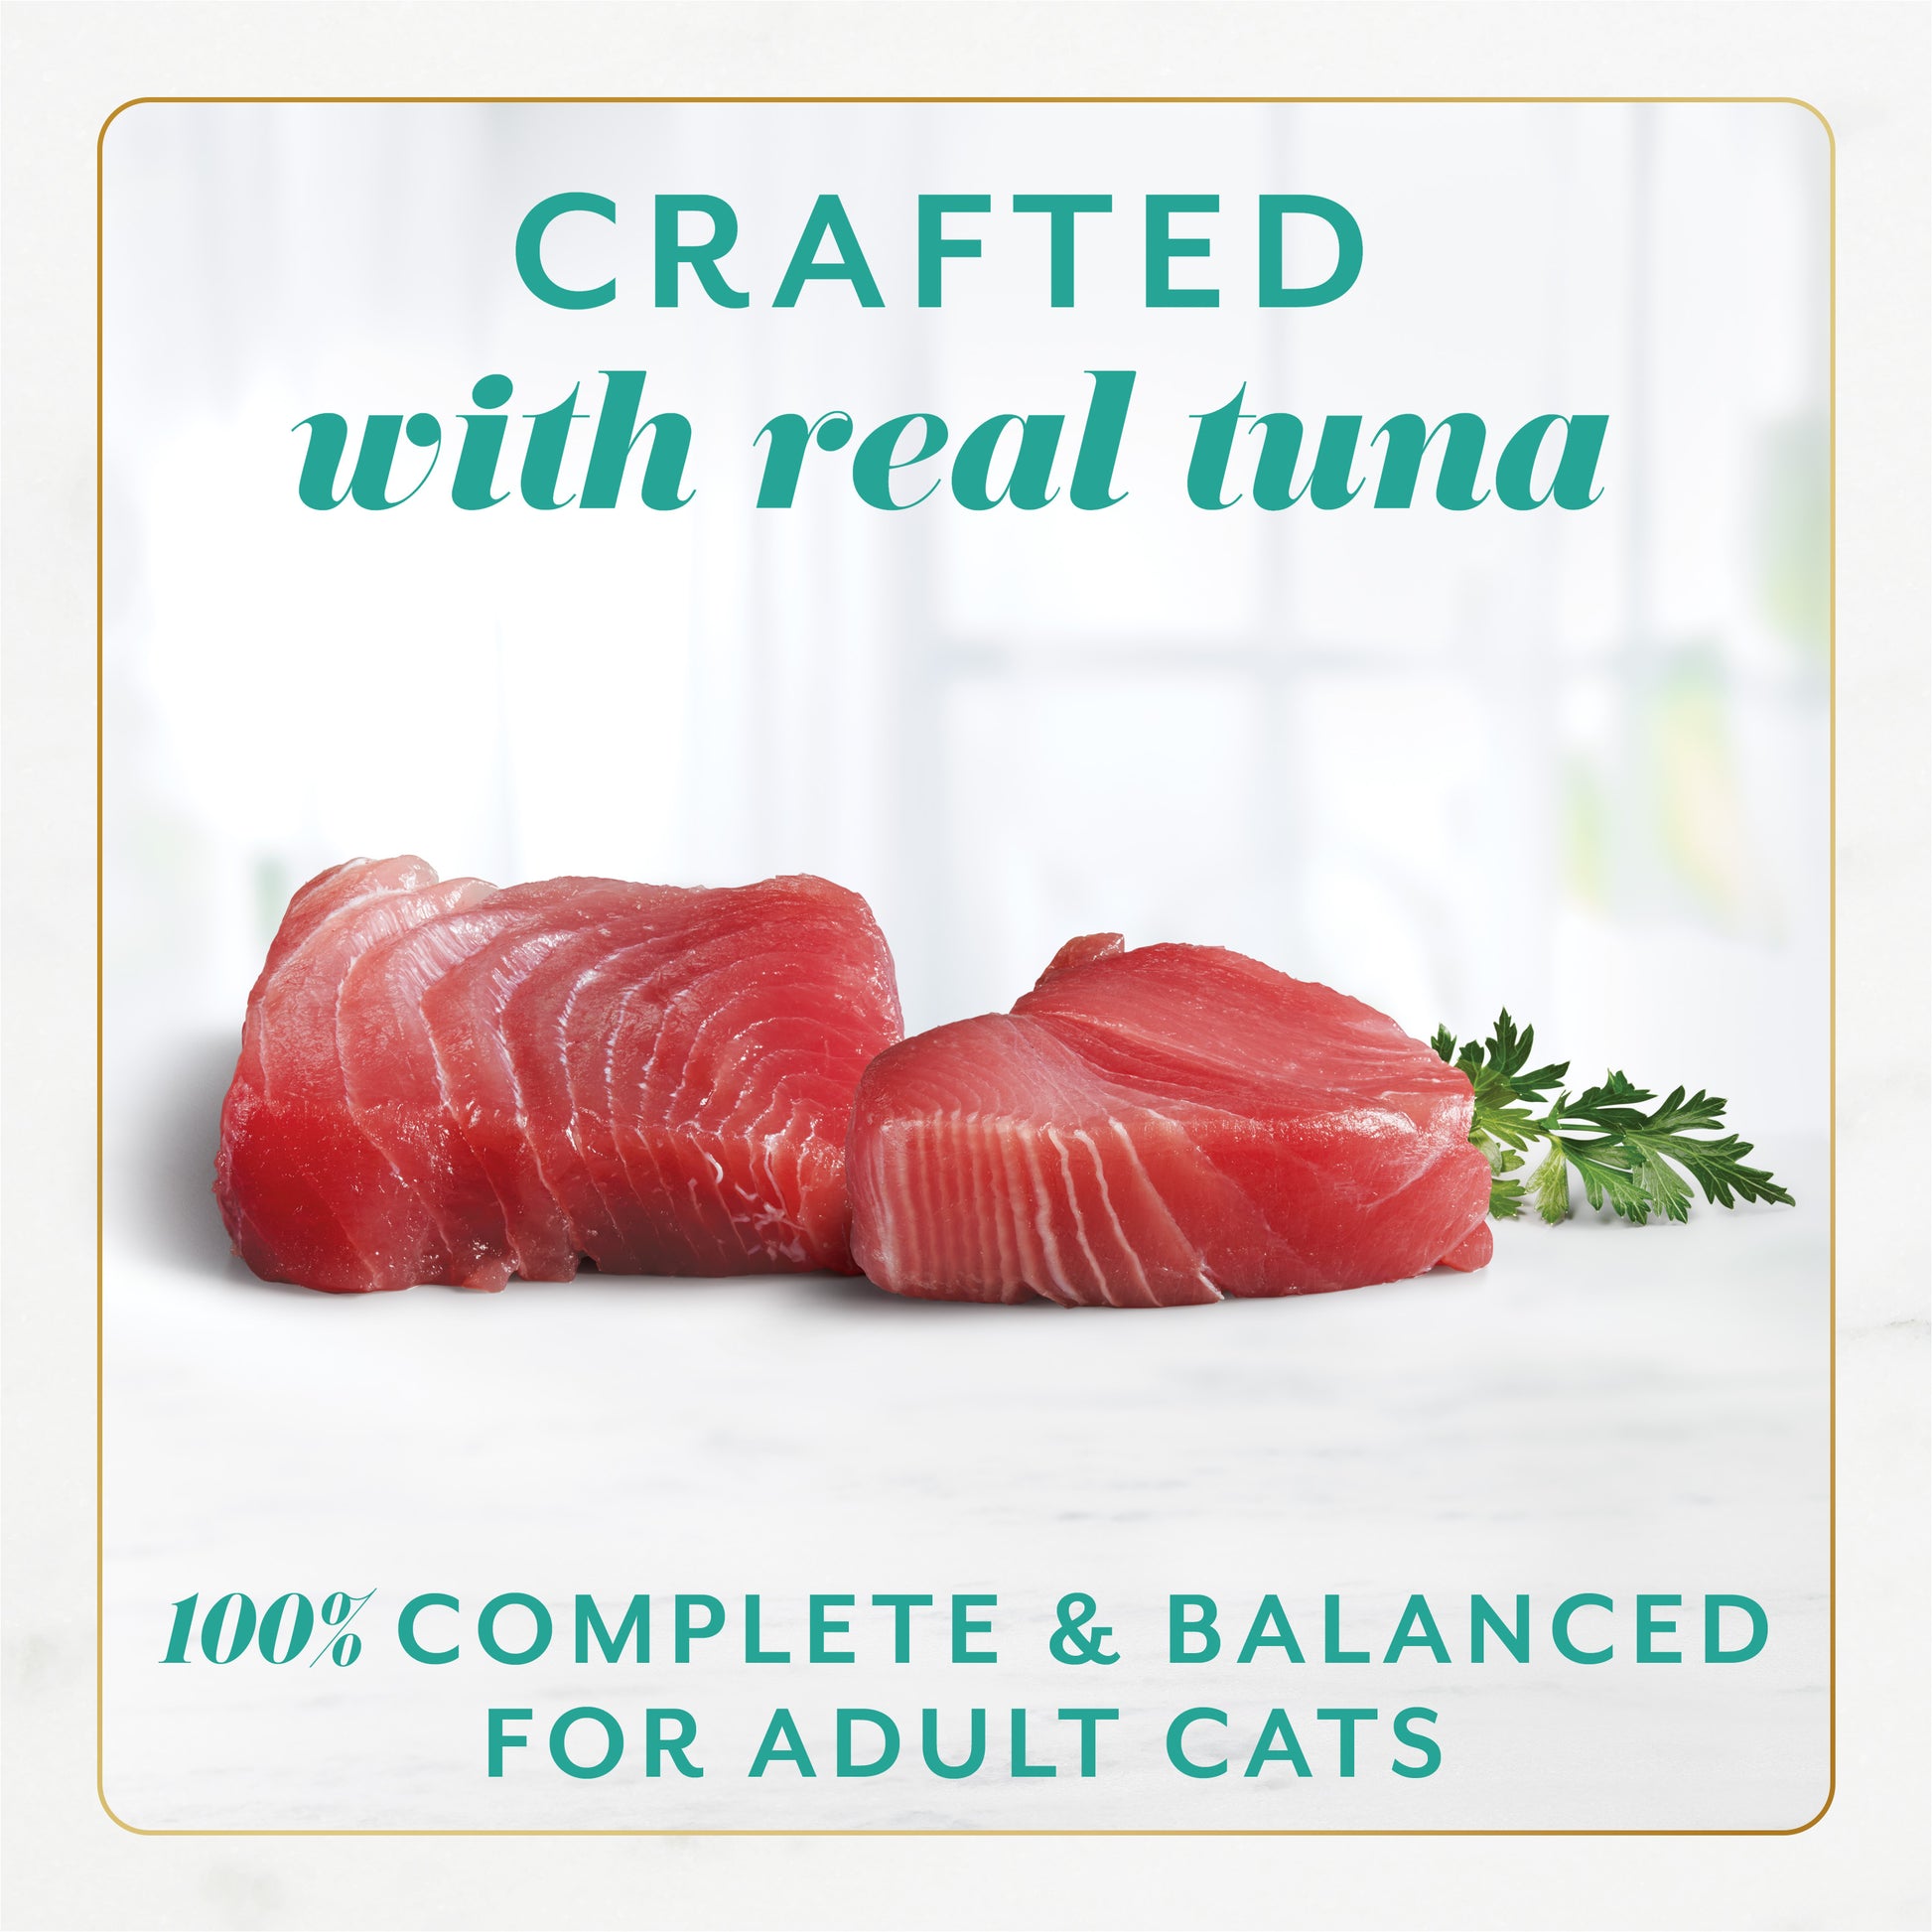 Crafted with real tuna. 100% complete and balanced for adult cats